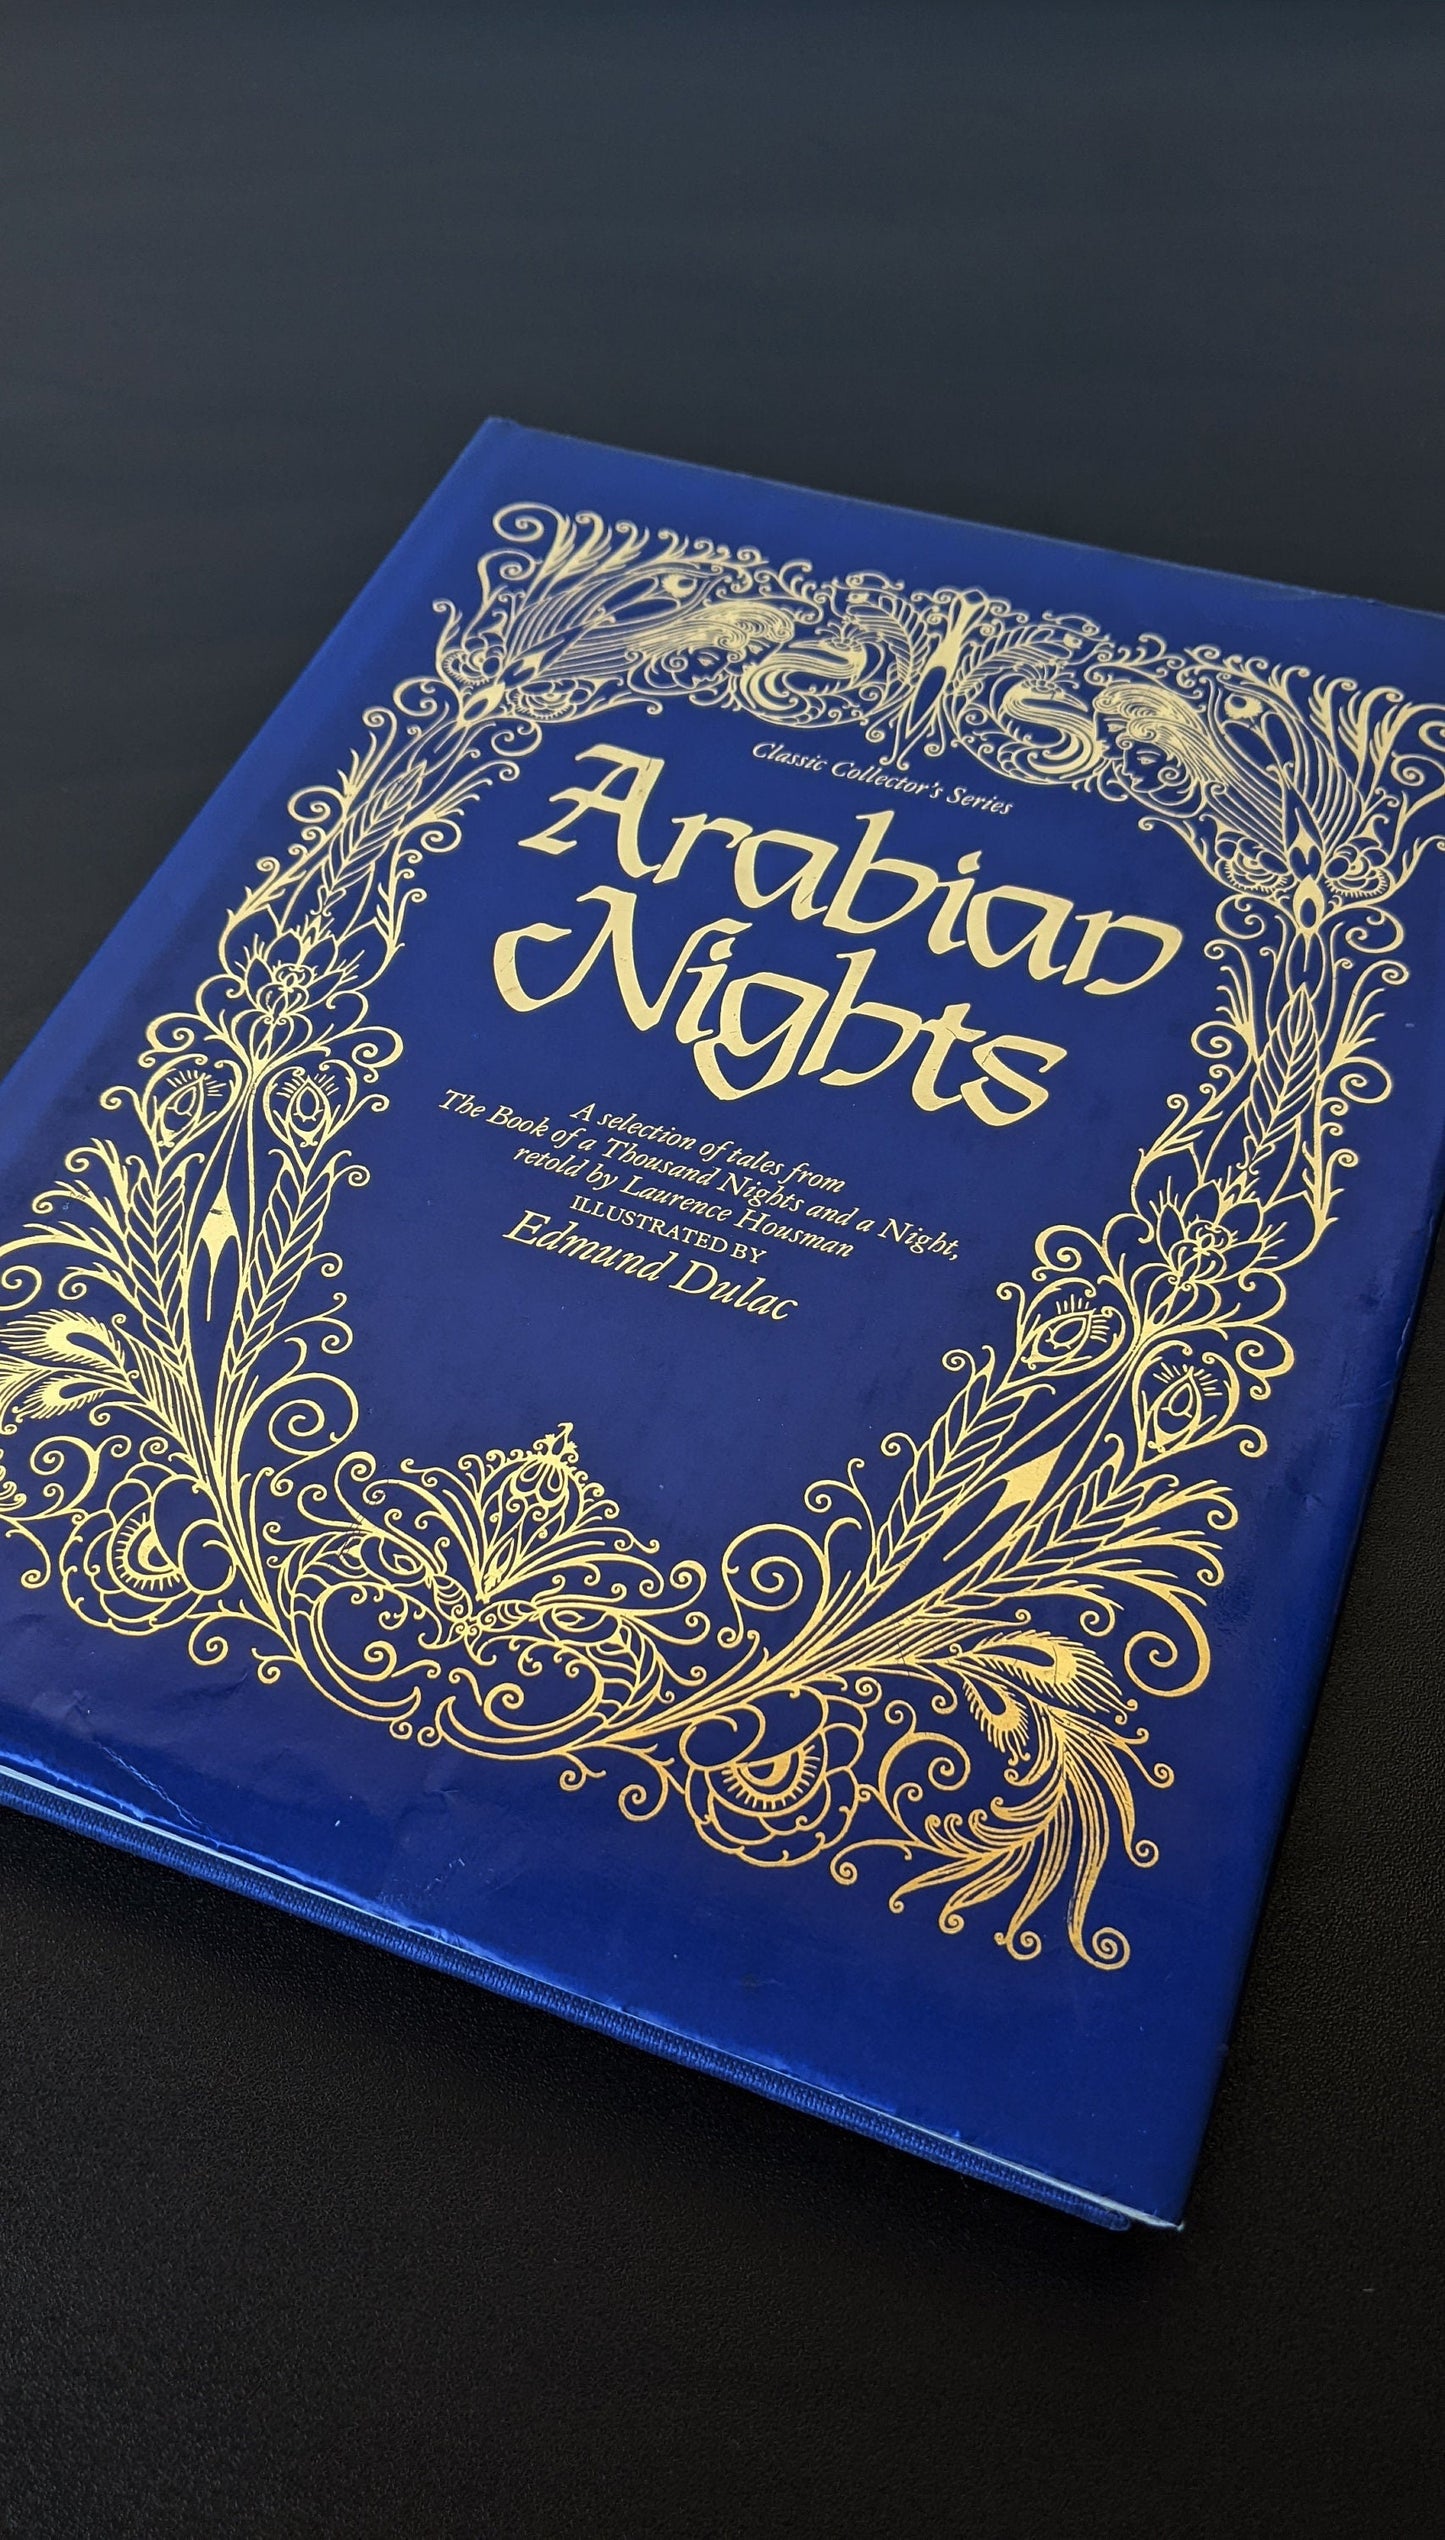 Arabian Nights Hardback, Illustrated by Edmund Dulac, 1985 Classic Collectors Series by Omega Books